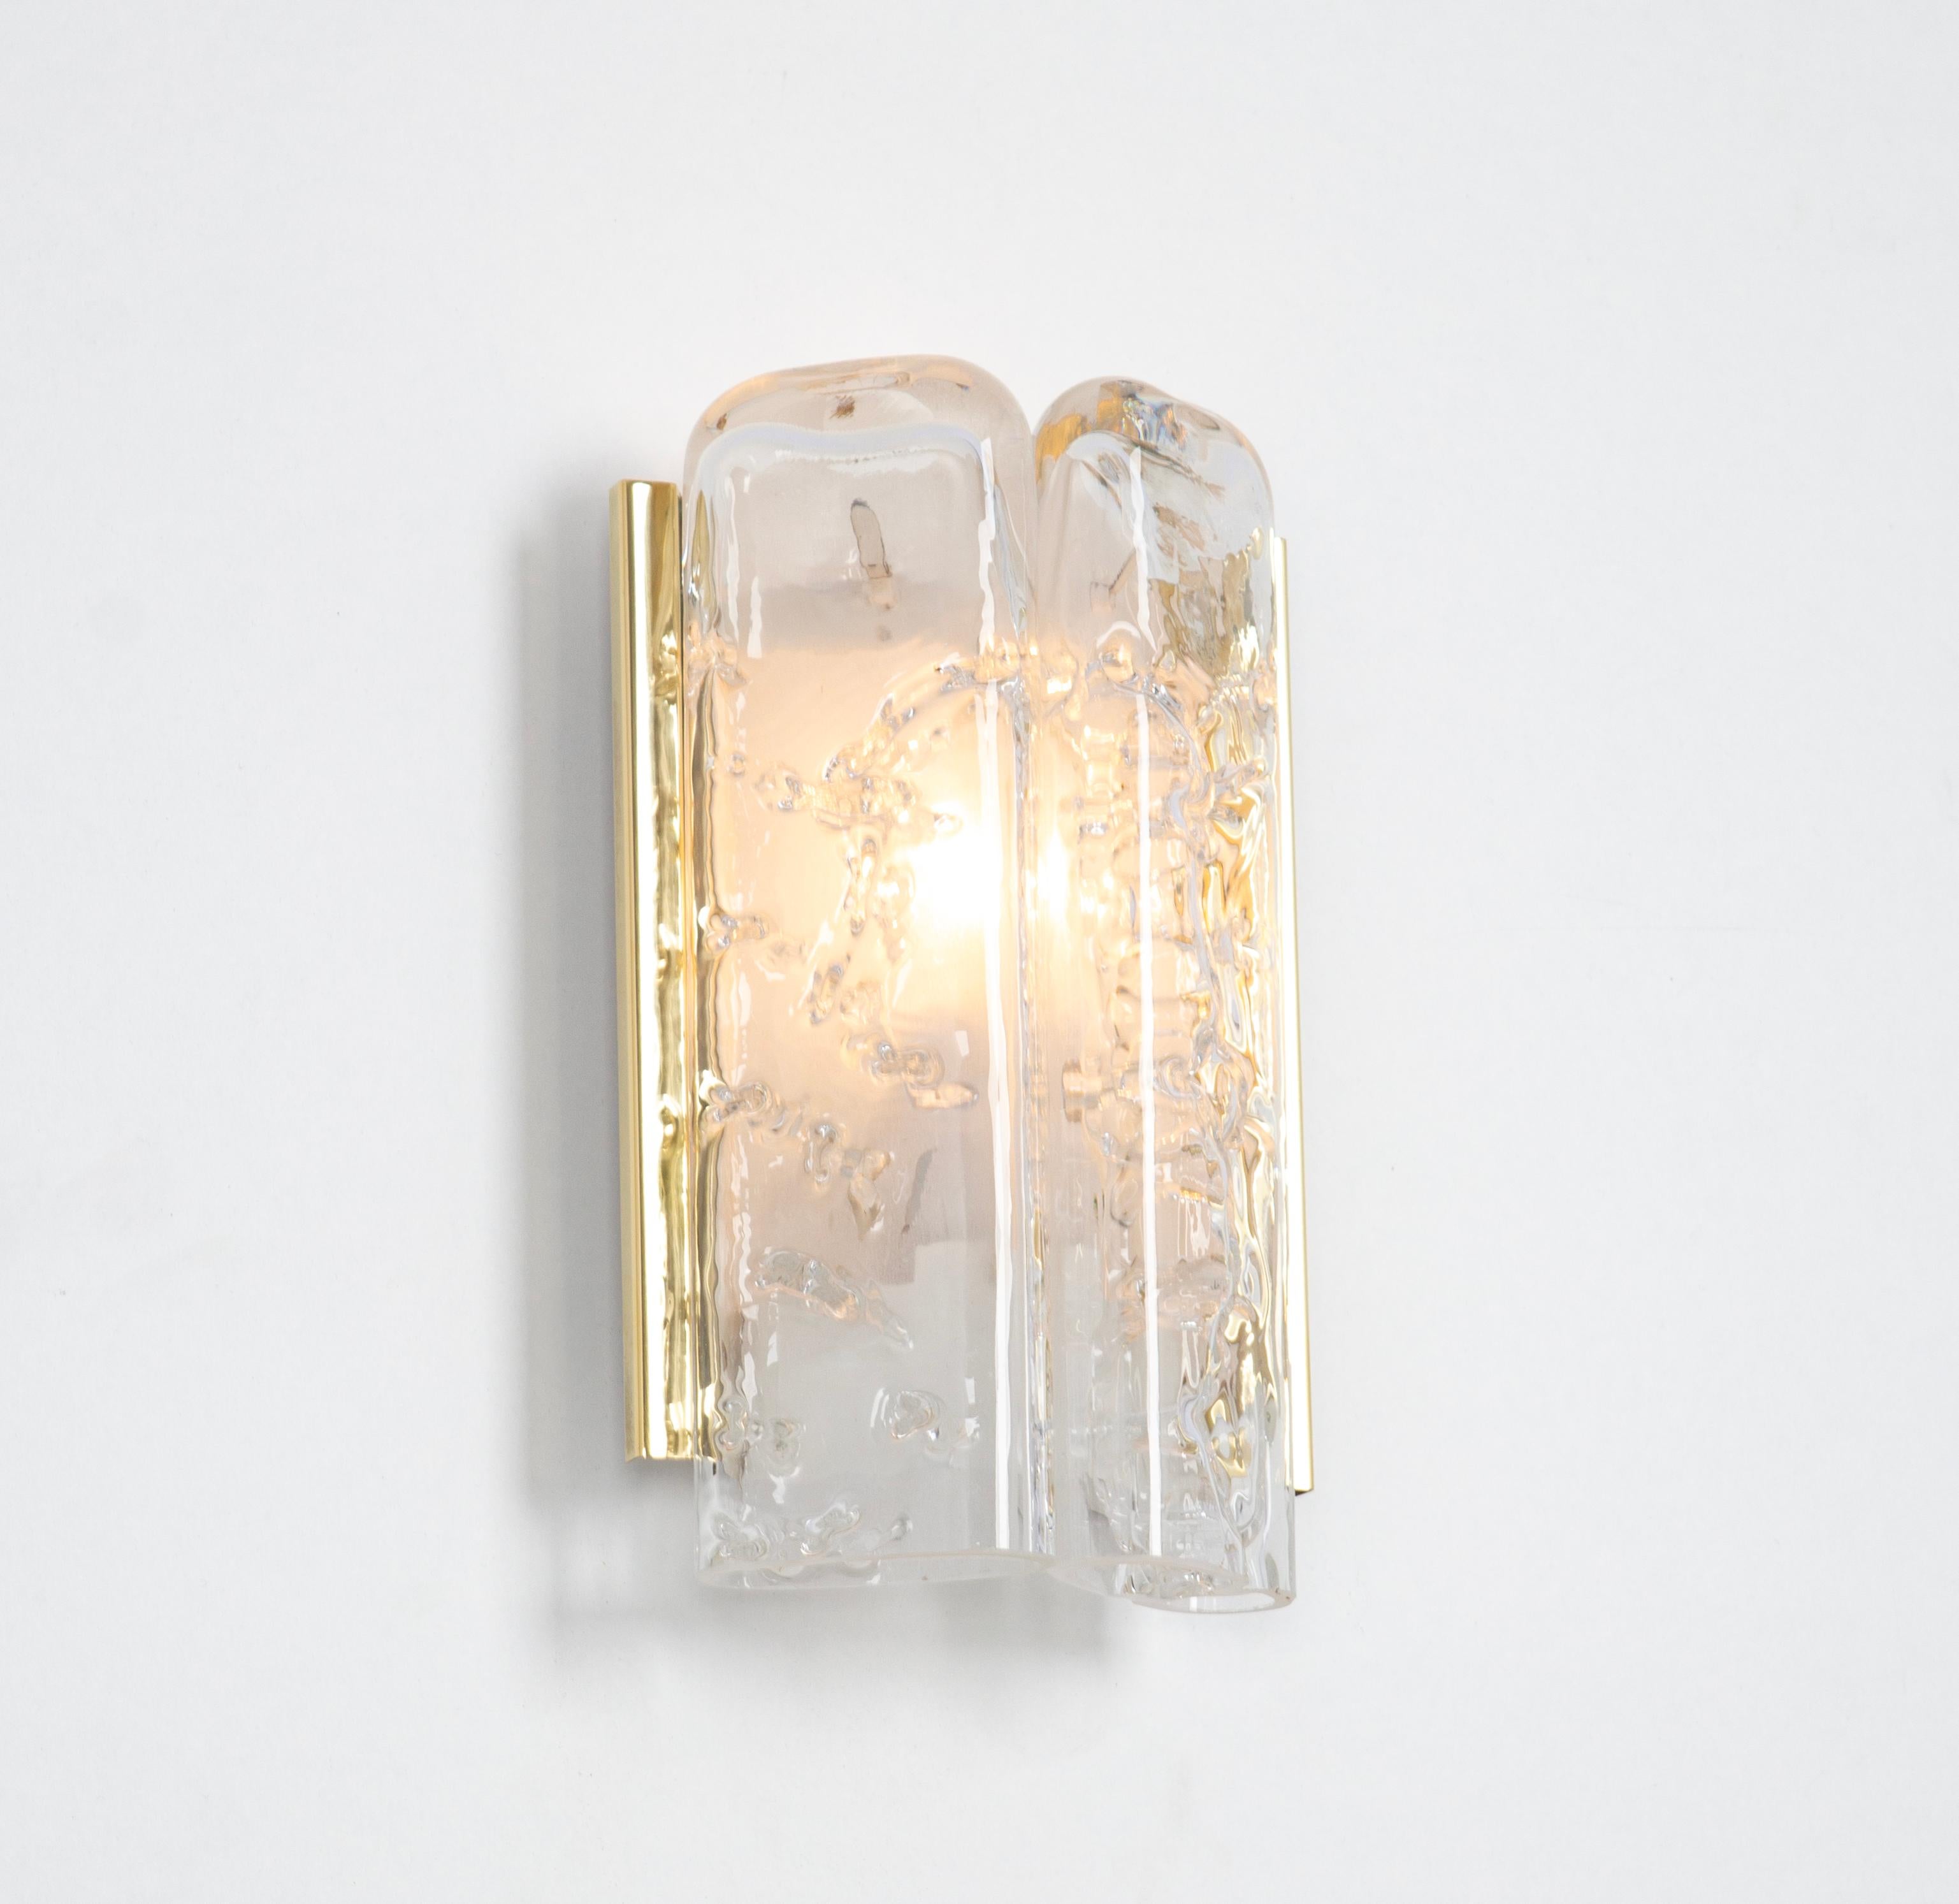 Pair of Brass and Murano Glass Wall Sconces by Doria, Germany, 1960s For Sale 1